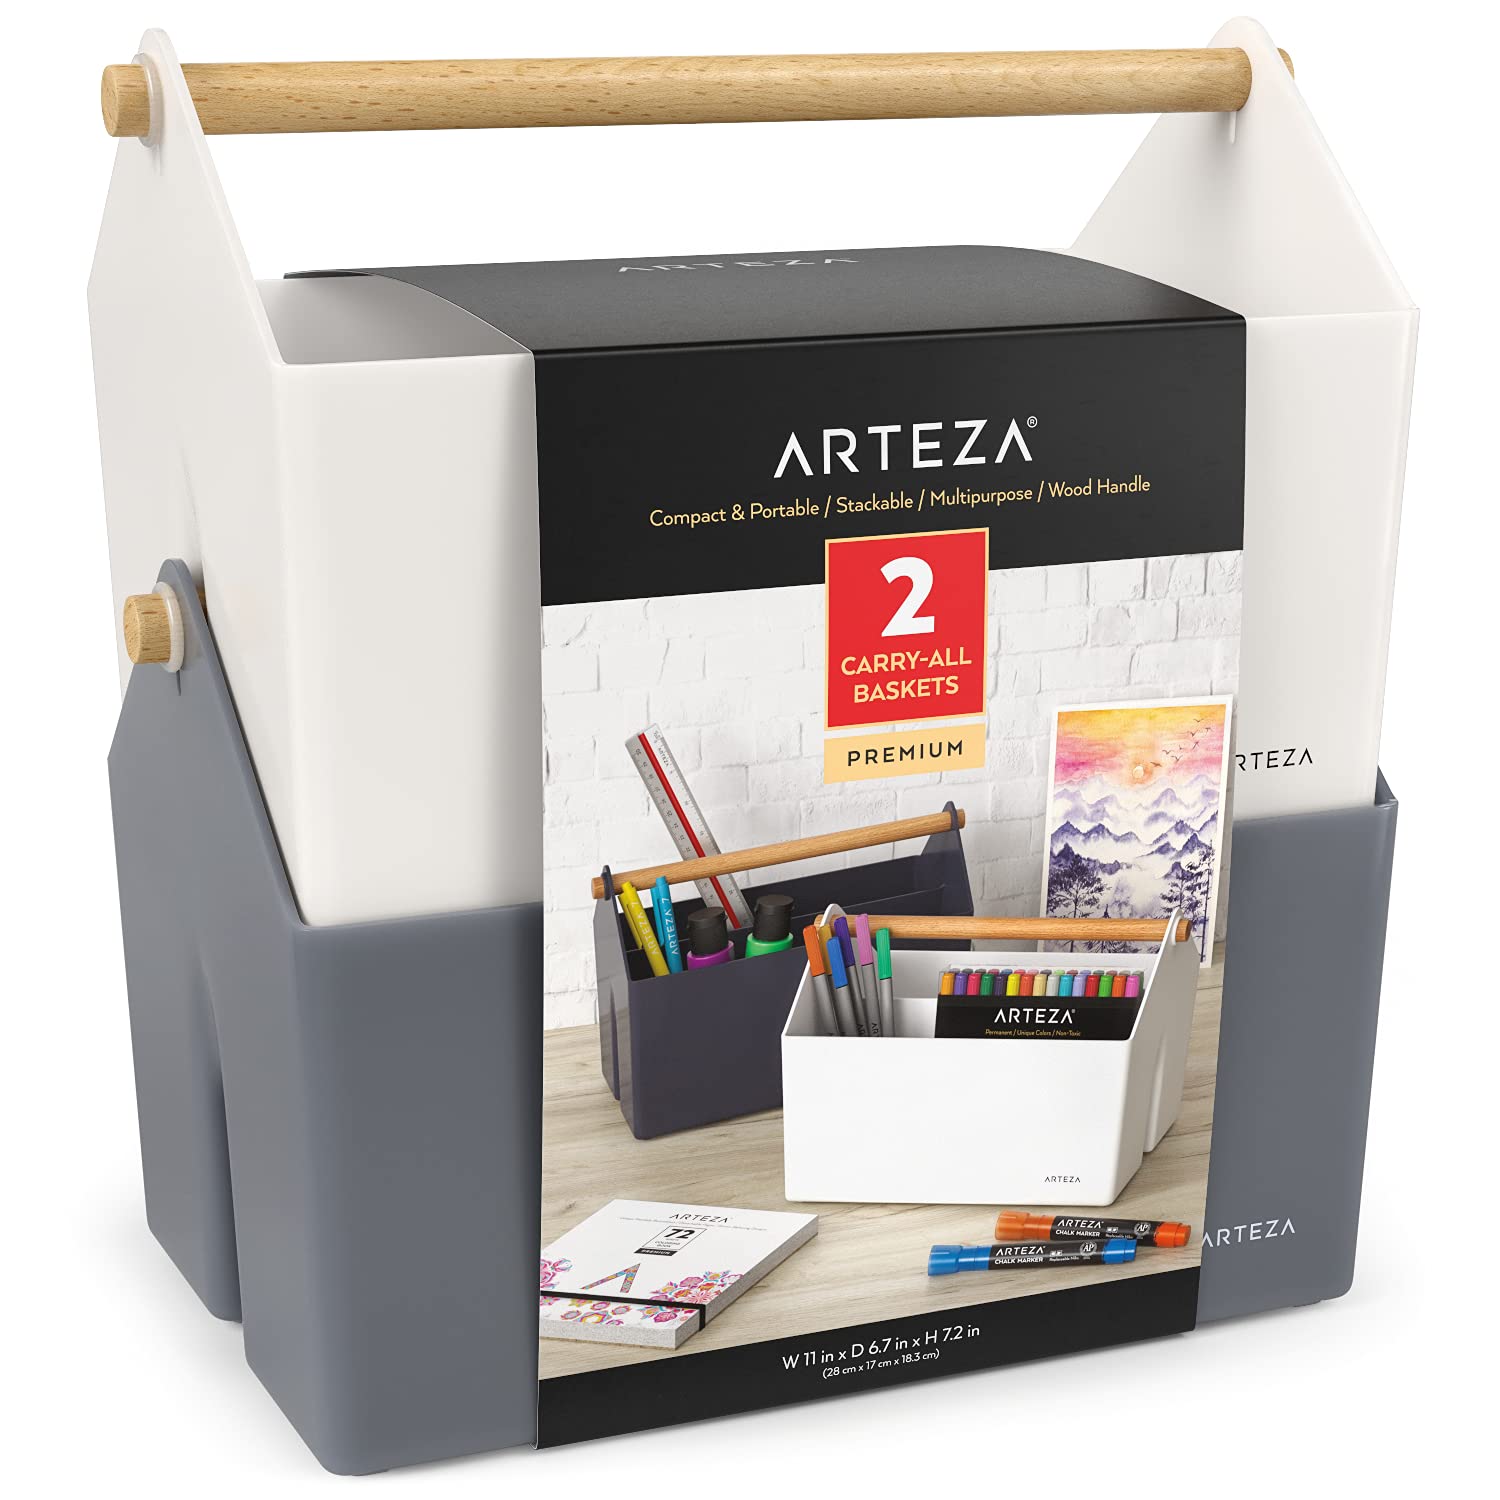 Arteza Plastic Portable Craft Storage Organizer, Pack of 2, Gray and Ivory, 3-Sectioned Plastic Basket with Handle, Caddy Organizer for Art Supplies, 11 x 6.7 x 7.2 inches